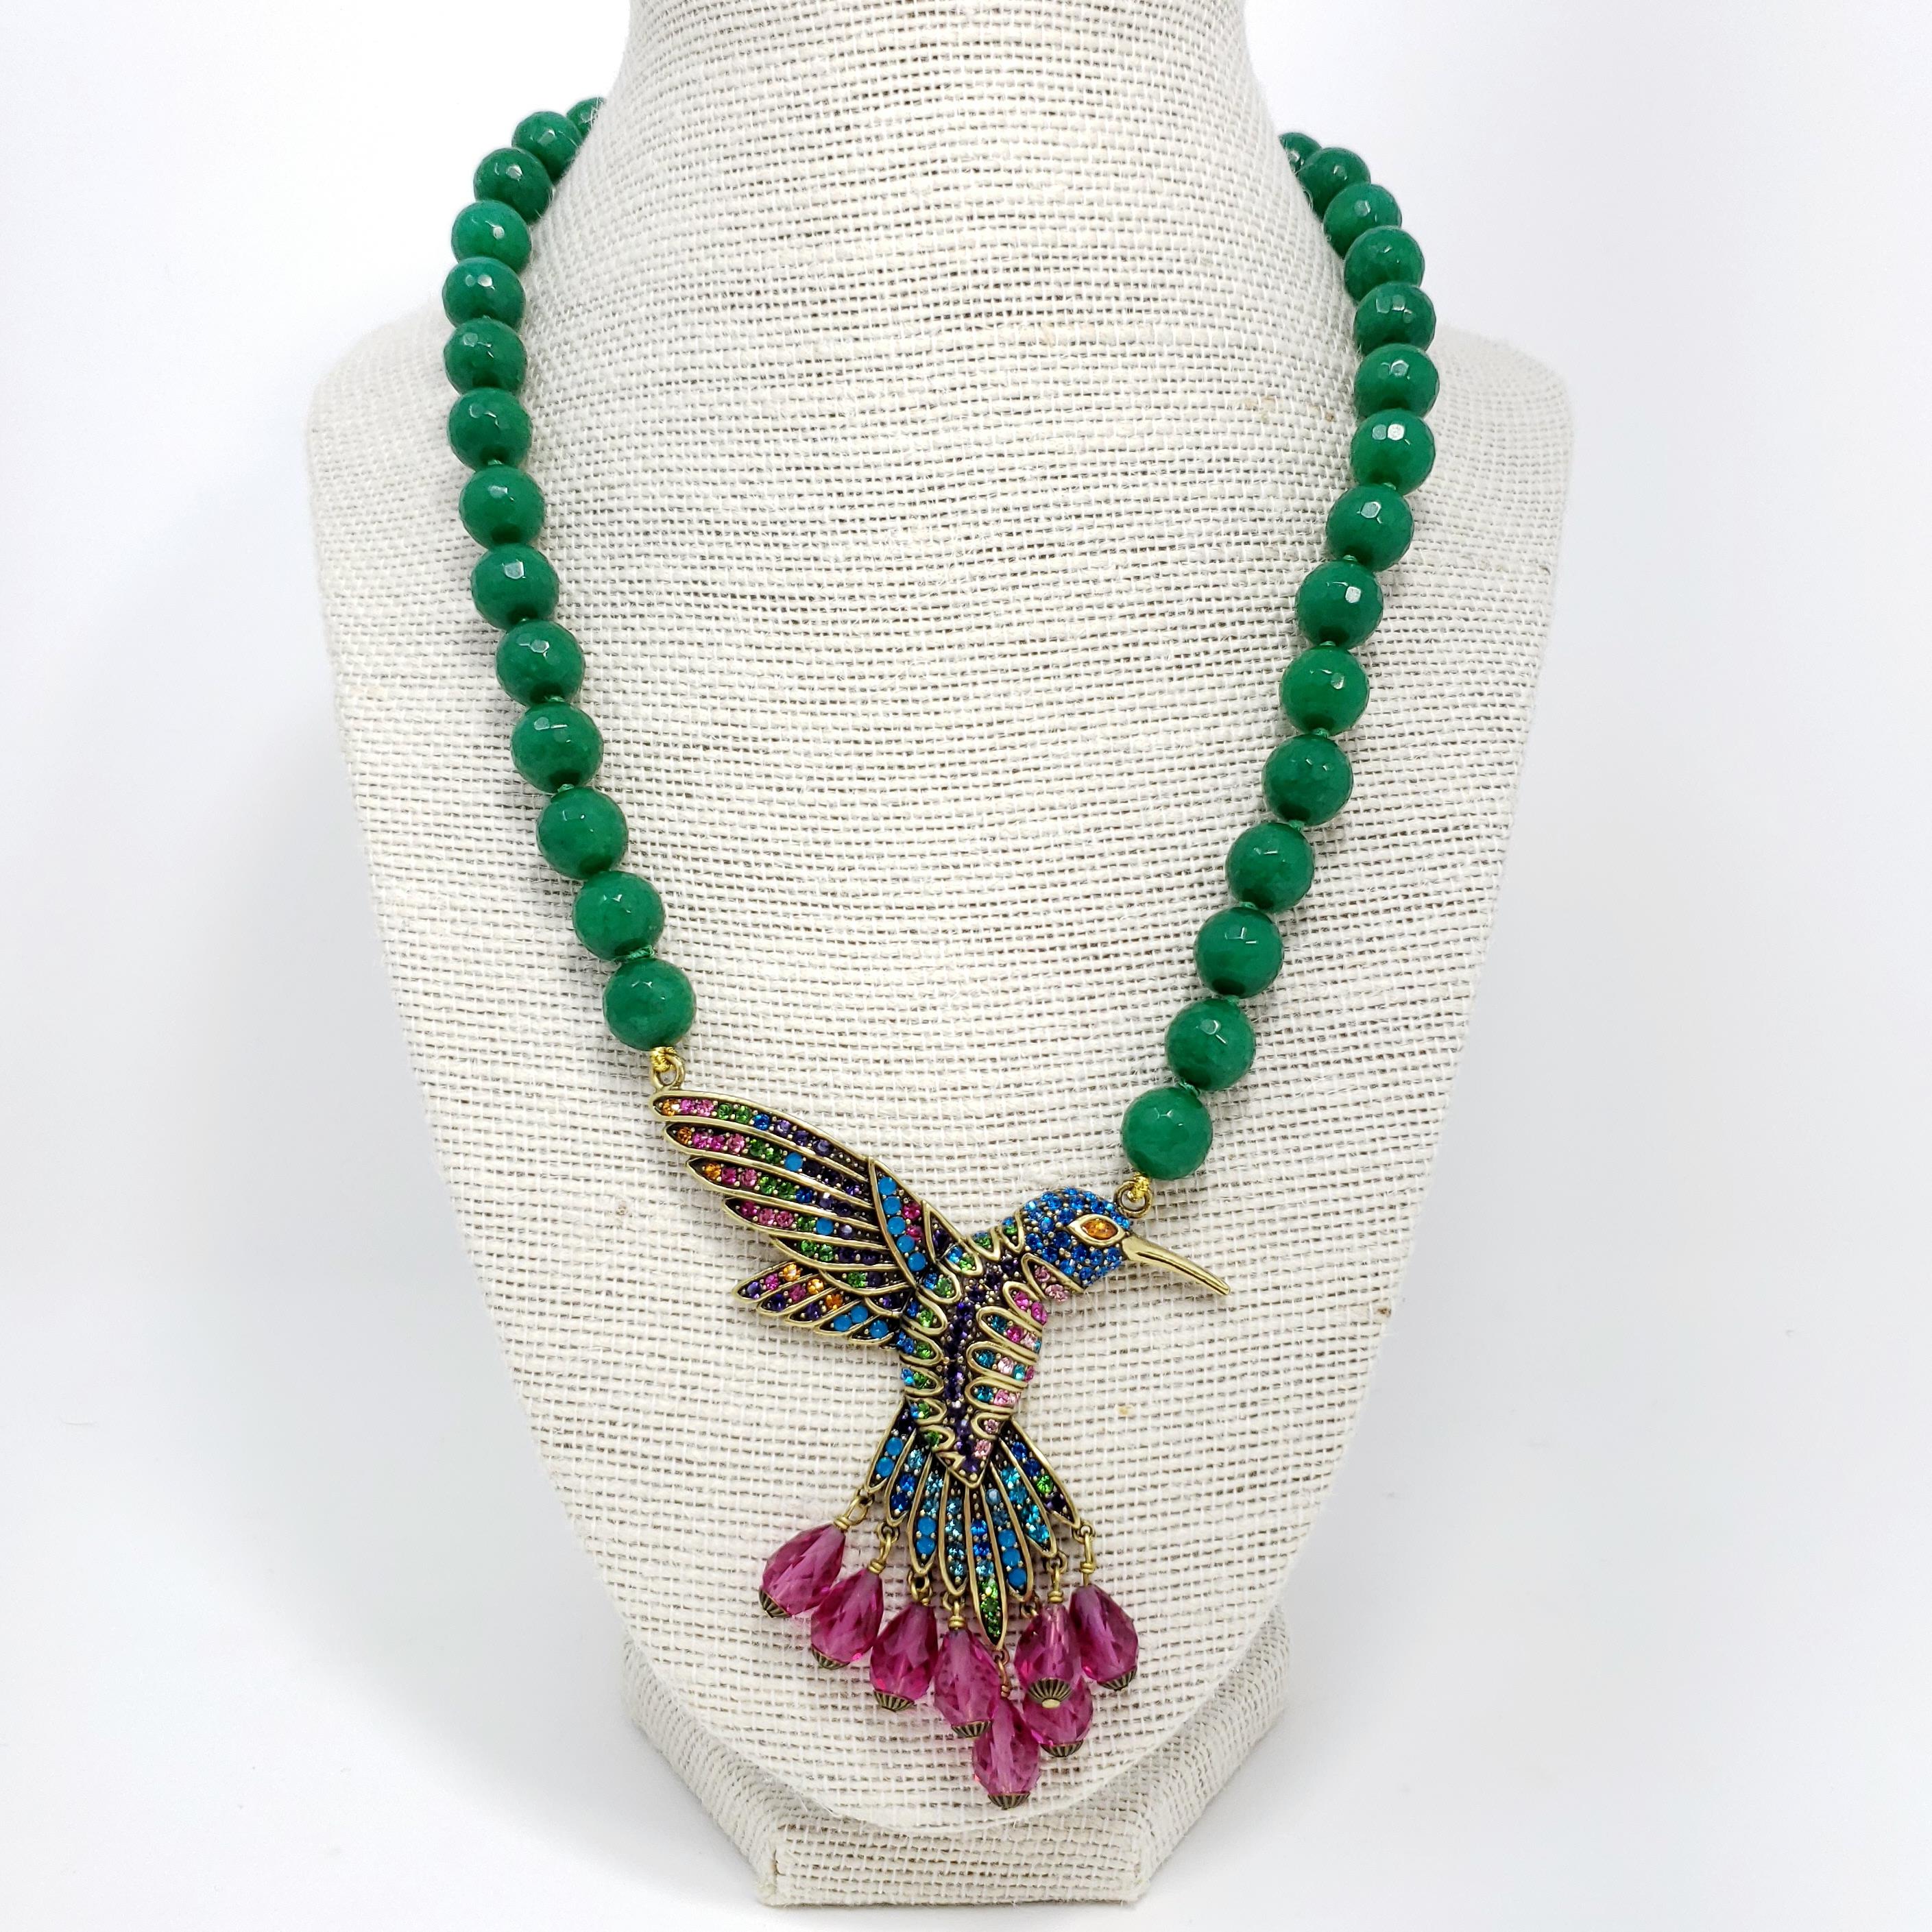 Soar to new heights of glamour. This enticing hummingbird design is covered from head to feathered tail in rich, sparkling crystal details. It's just what you need to get ahead of the fashion flock.

Single strand of individually knotted, smooth